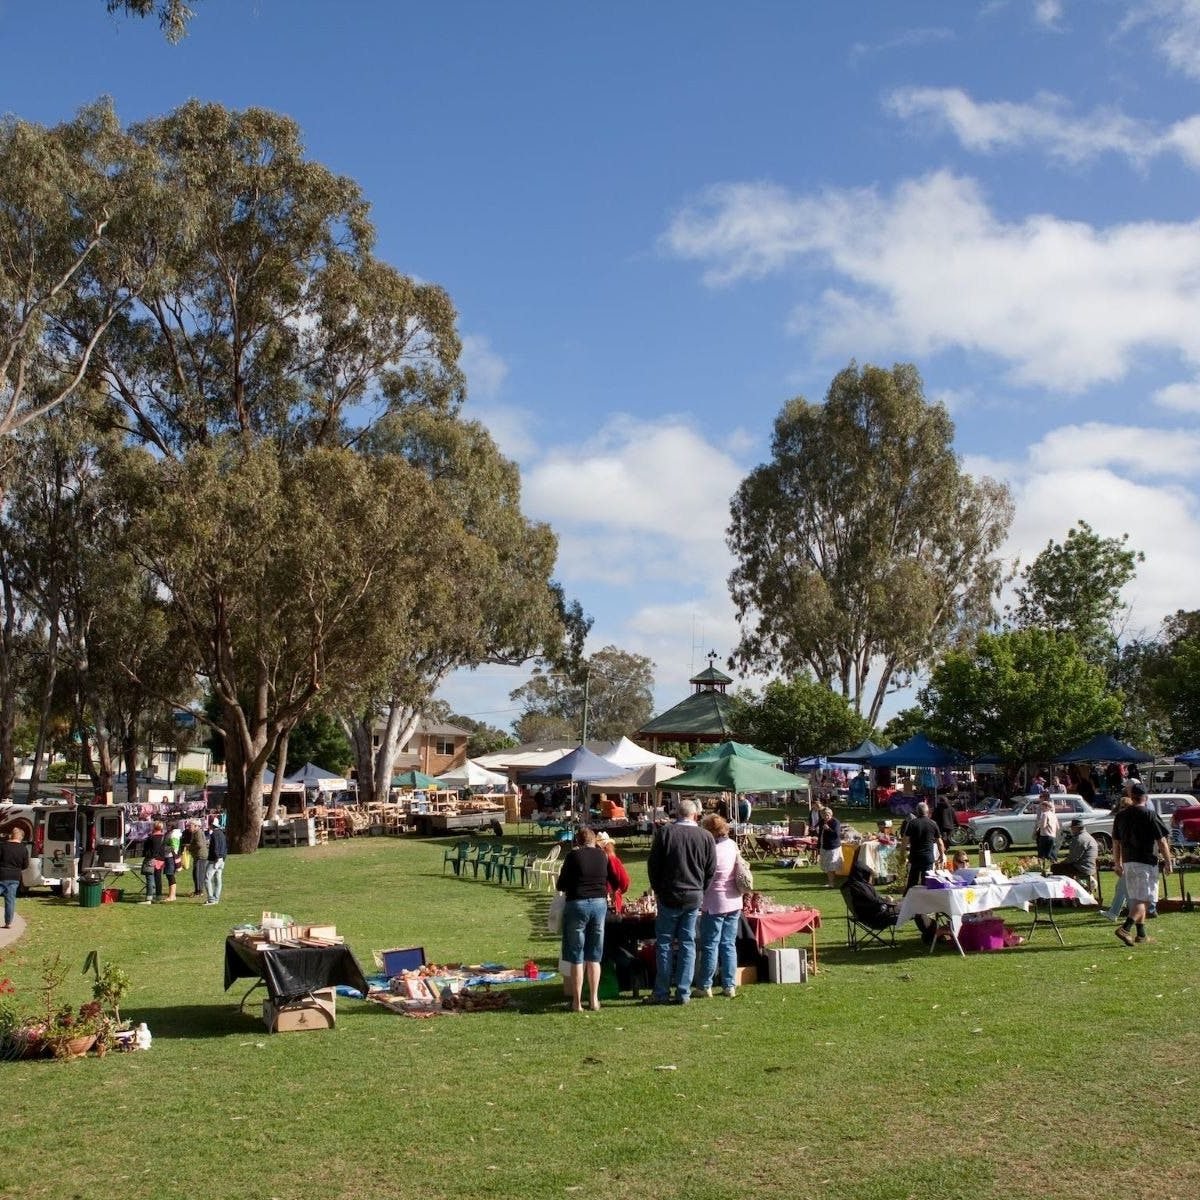 Sunday, 28 April 8:00am - 1:00pm

The Moama Market has something on offer for everyone!

Live music, over 120+ stalls, hot food &amp; coffee, dog friendly, free parking, a stunning natural setting at the Moama Sound Shell, and us!  See you there!

- 